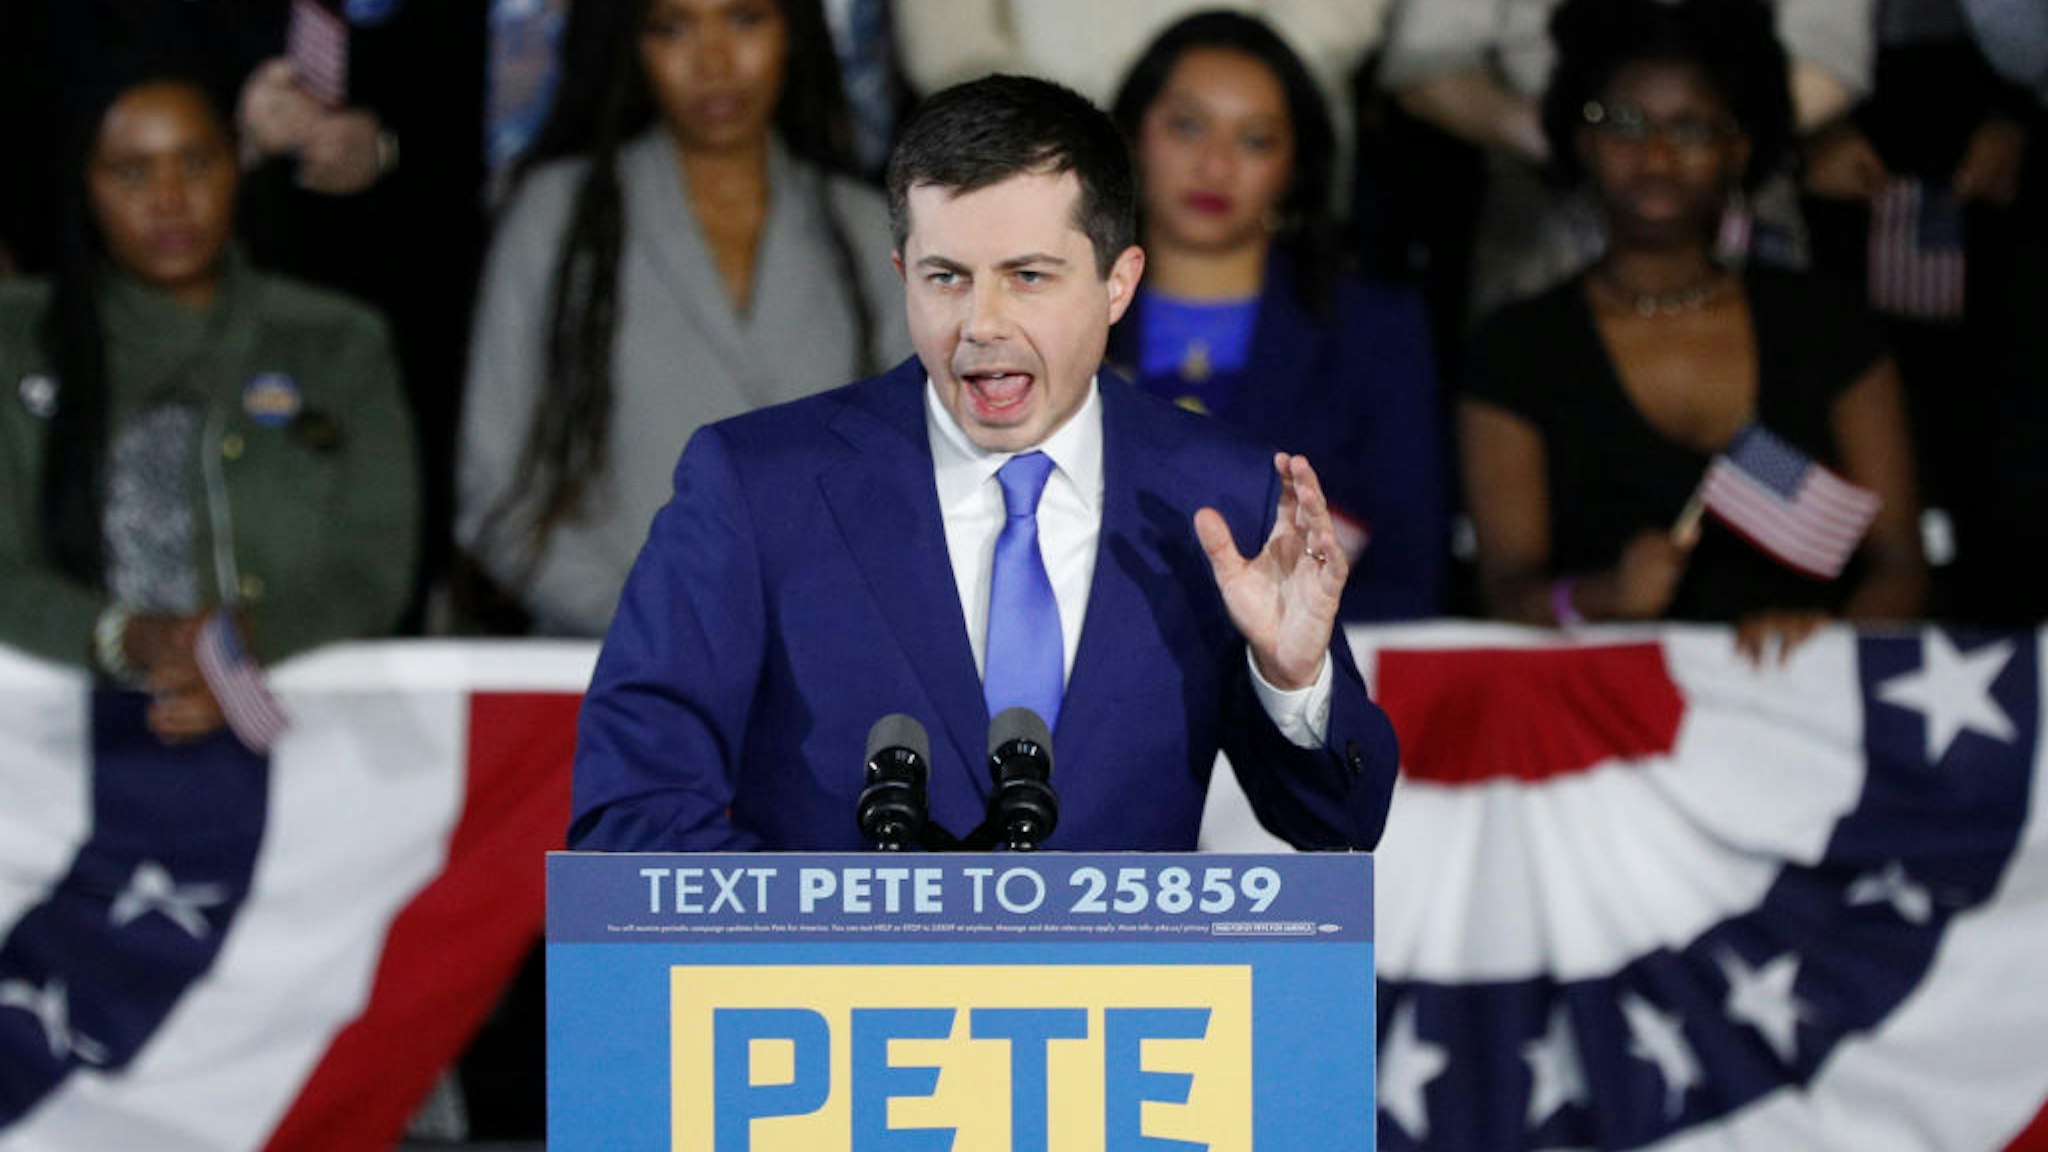 Democratic presidential candidate former South Bend, Indiana Mayor Pete Buttigieg addresses supporters during his caucus night watch party on February 03, 2020 in Des Moines, Iowa.